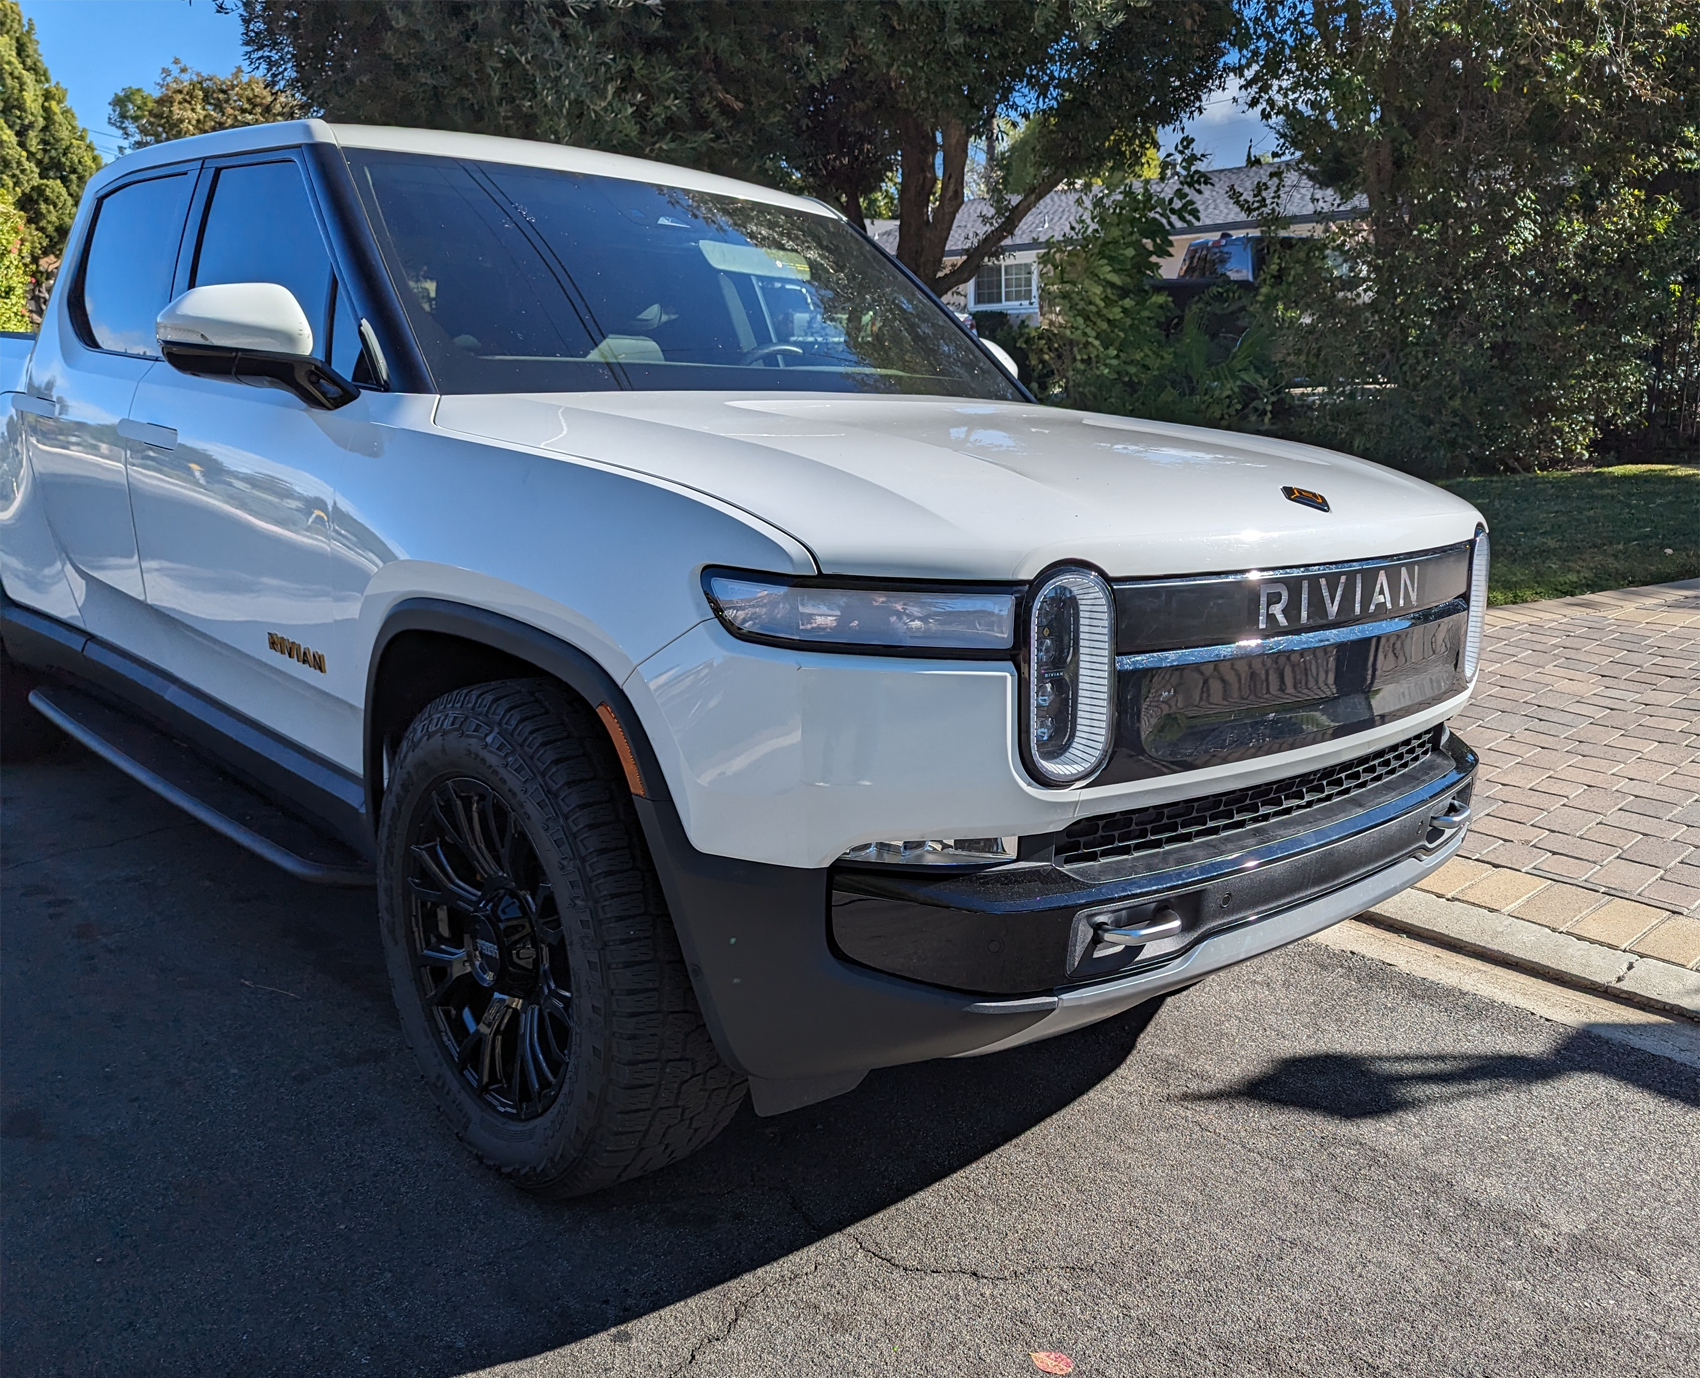 Rivian R1T R1S UPDATE: Blackout lightbar decal added + applied vinyl to break up the controversial front end on my Rivian 1704653160192-